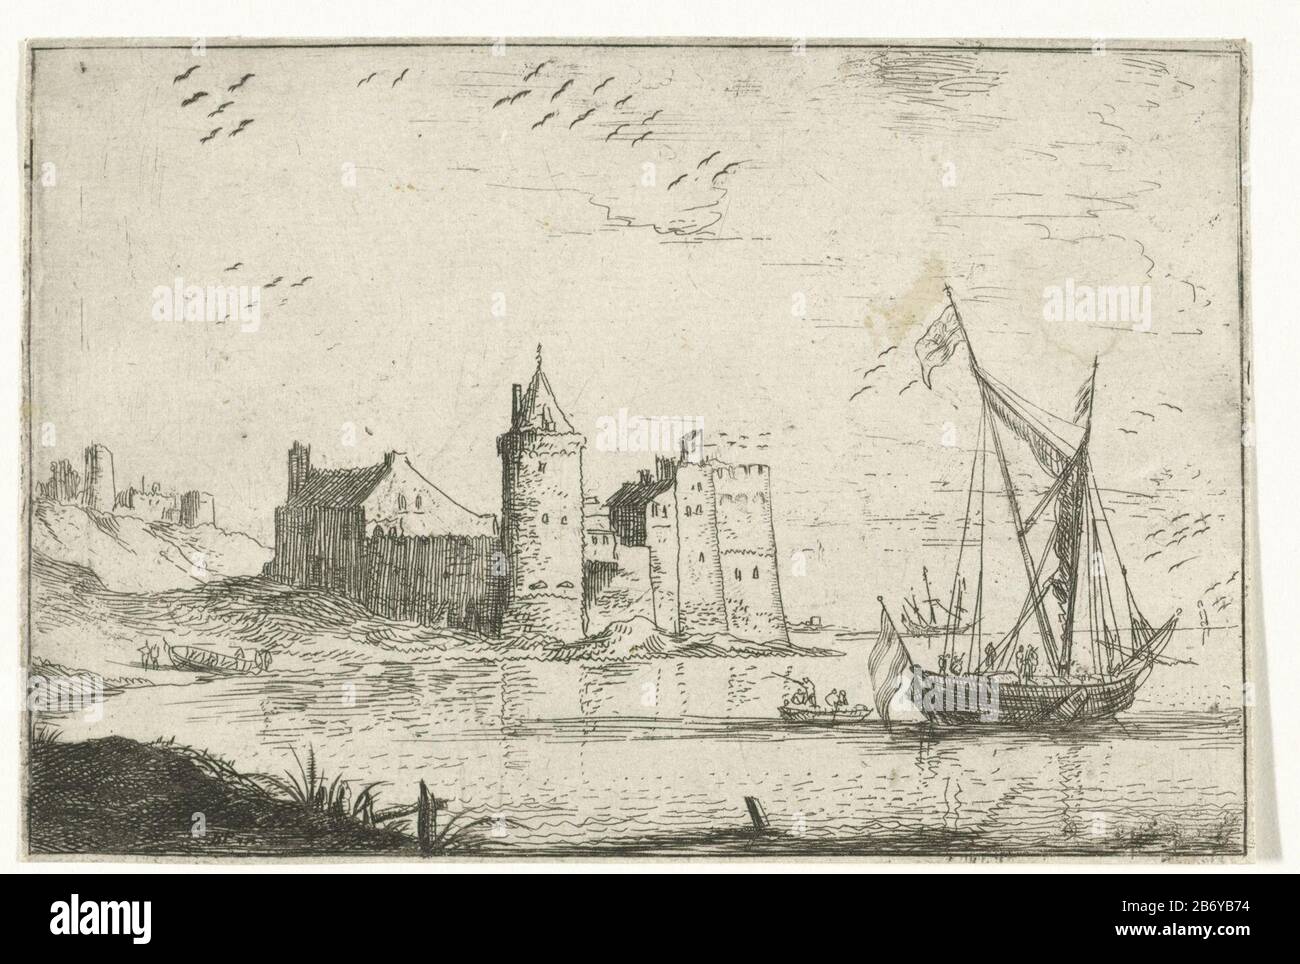 Kasteel aan de kust Castle on the coast object type: picture Item number: RP-P-1888-A-12798Catalogusreferentie: Hollstein Dutch 6-2 (2) Markings / Brands: collector's mark, verso lower left, stamped: Lugt 2228 Manufacturer : printmaker: Bonaventura Peeters (I) in its design: Bonaventura Peeters (I) (shown on object) Place manufacture: Antwerpen Date: 1624 - 1652 Physical characteristics: etching and engra material: paper Technique: etching / engra (printing process) Measurements: sheet: h 84 mm × b mm Subject 126: castlesea (seascape) (+ landscape with figures, staffage) Stock Photo